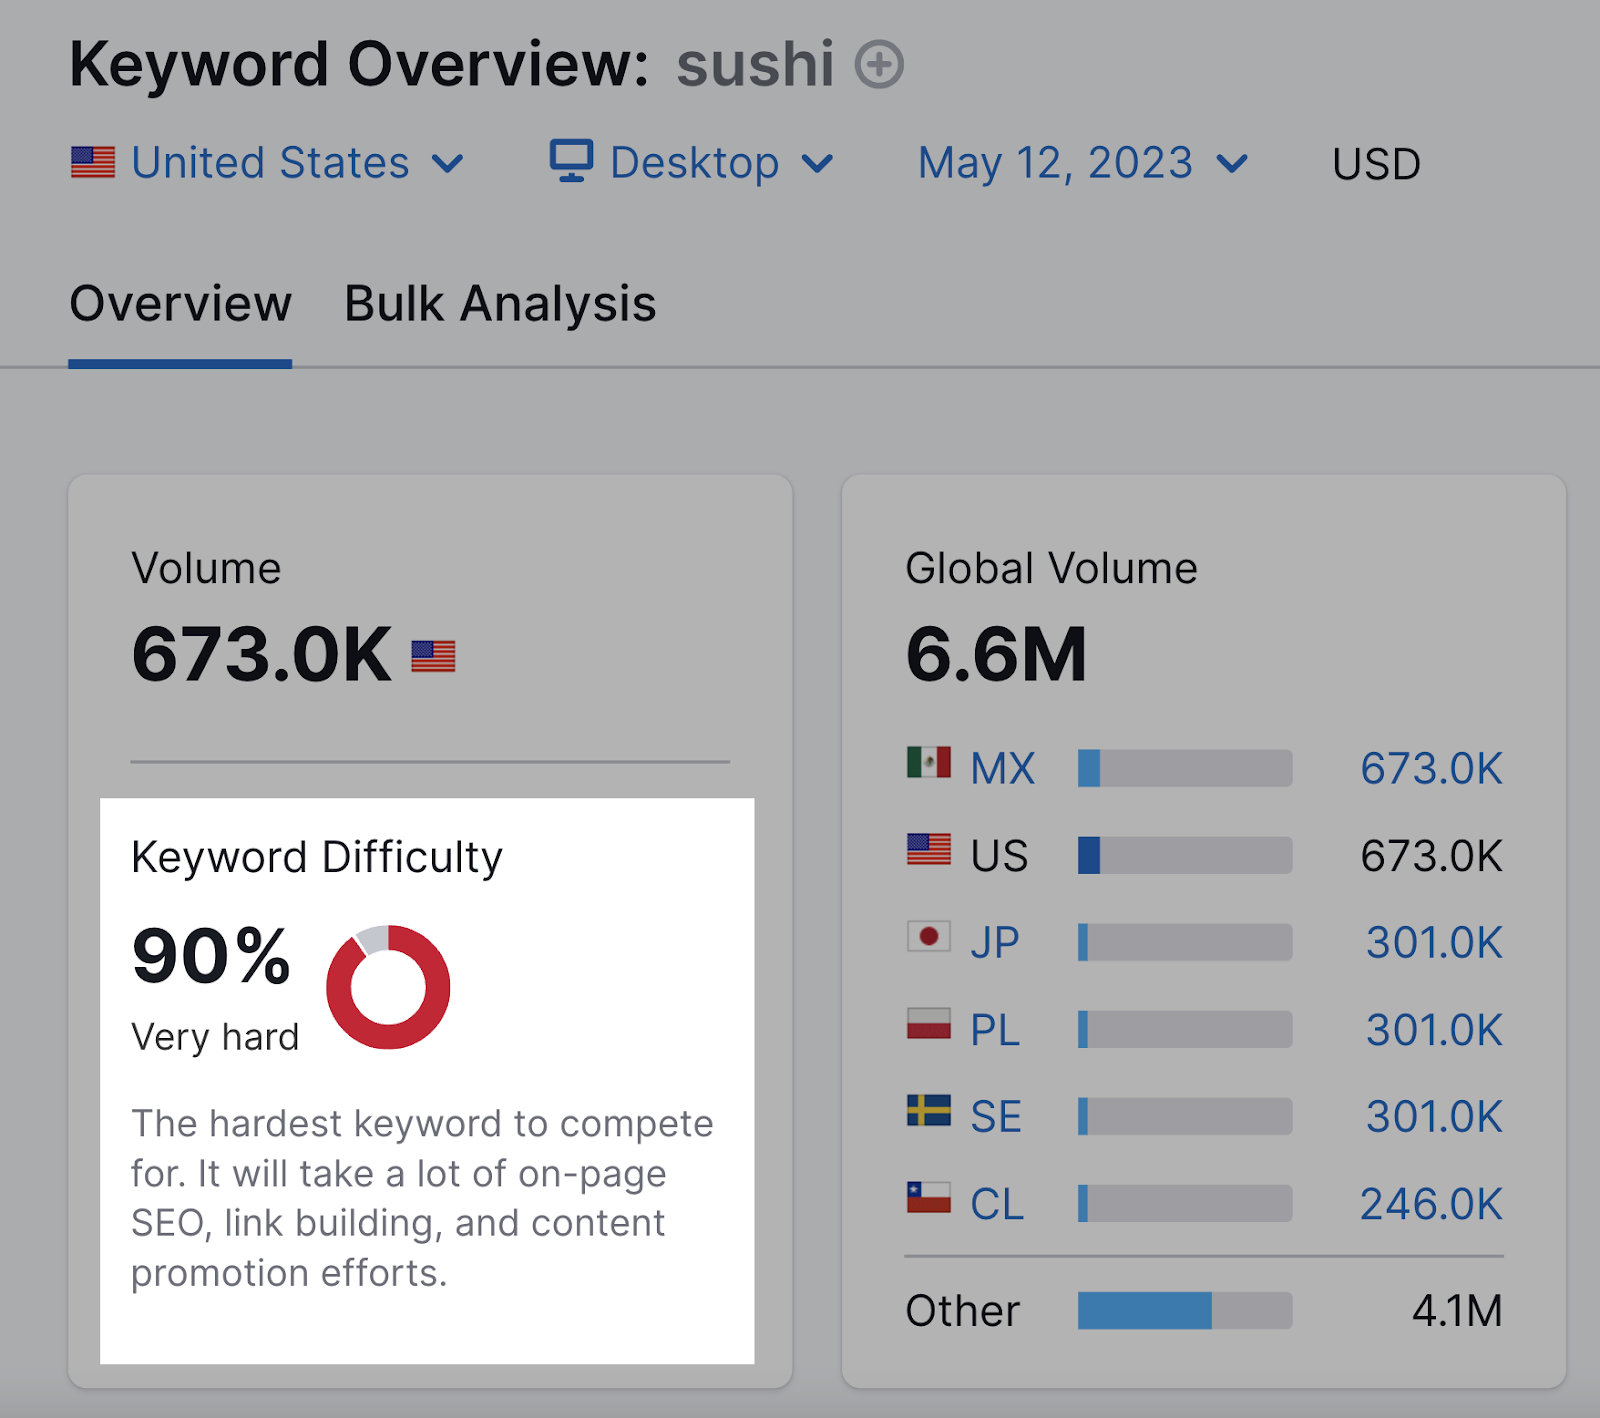 "Keyword Difficulty" metric for "sushi" in Keyword Overview tool is 90%